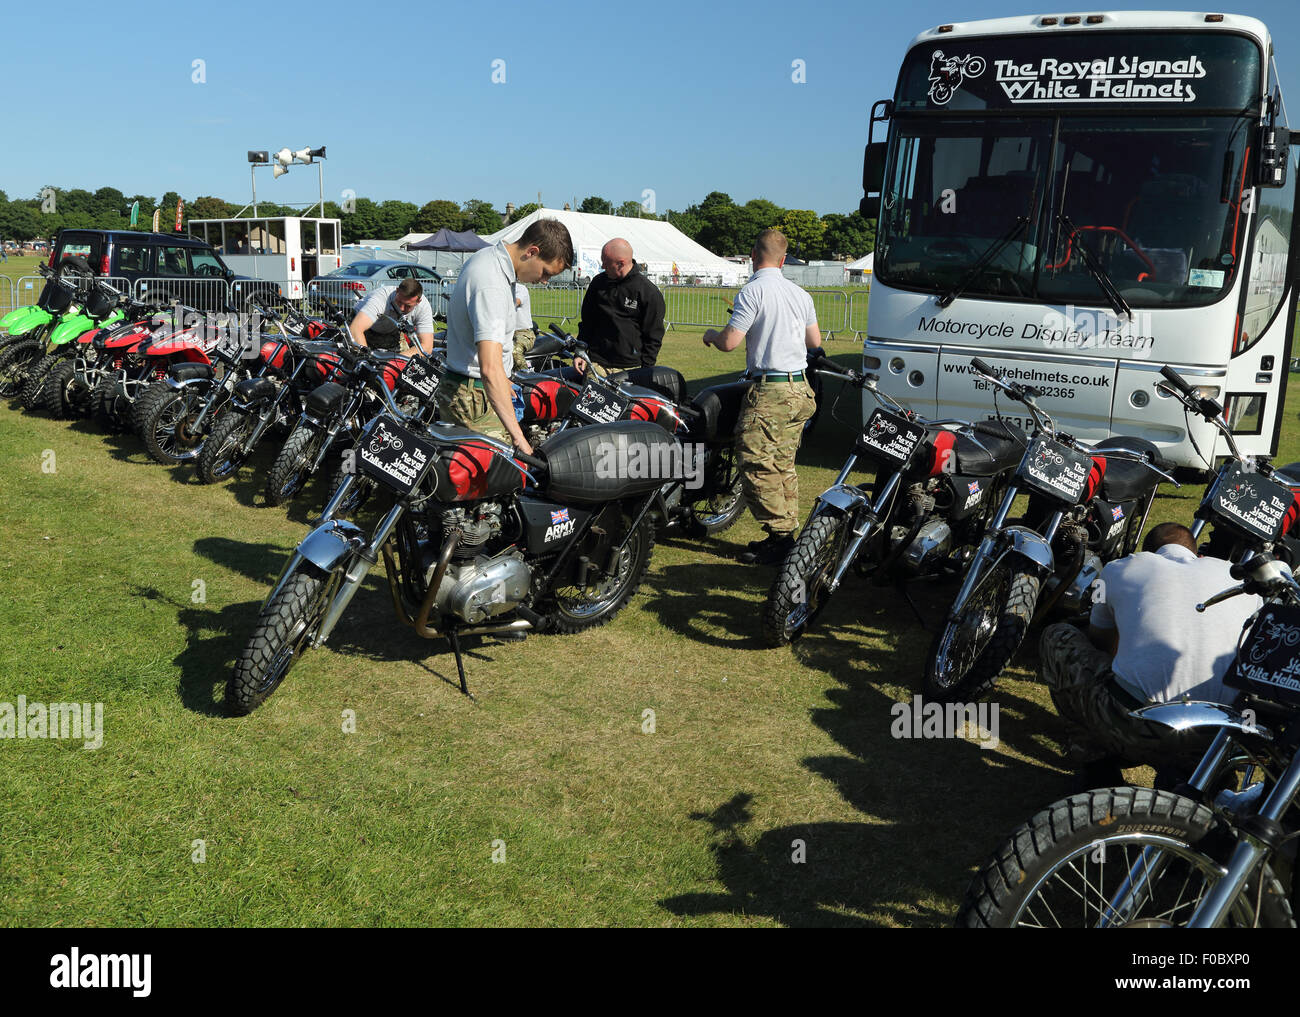 Royal Signals White Helmets Motor cycle Display Team preparing to perform stunts at the Halifax show in August 2015 Stock Photo